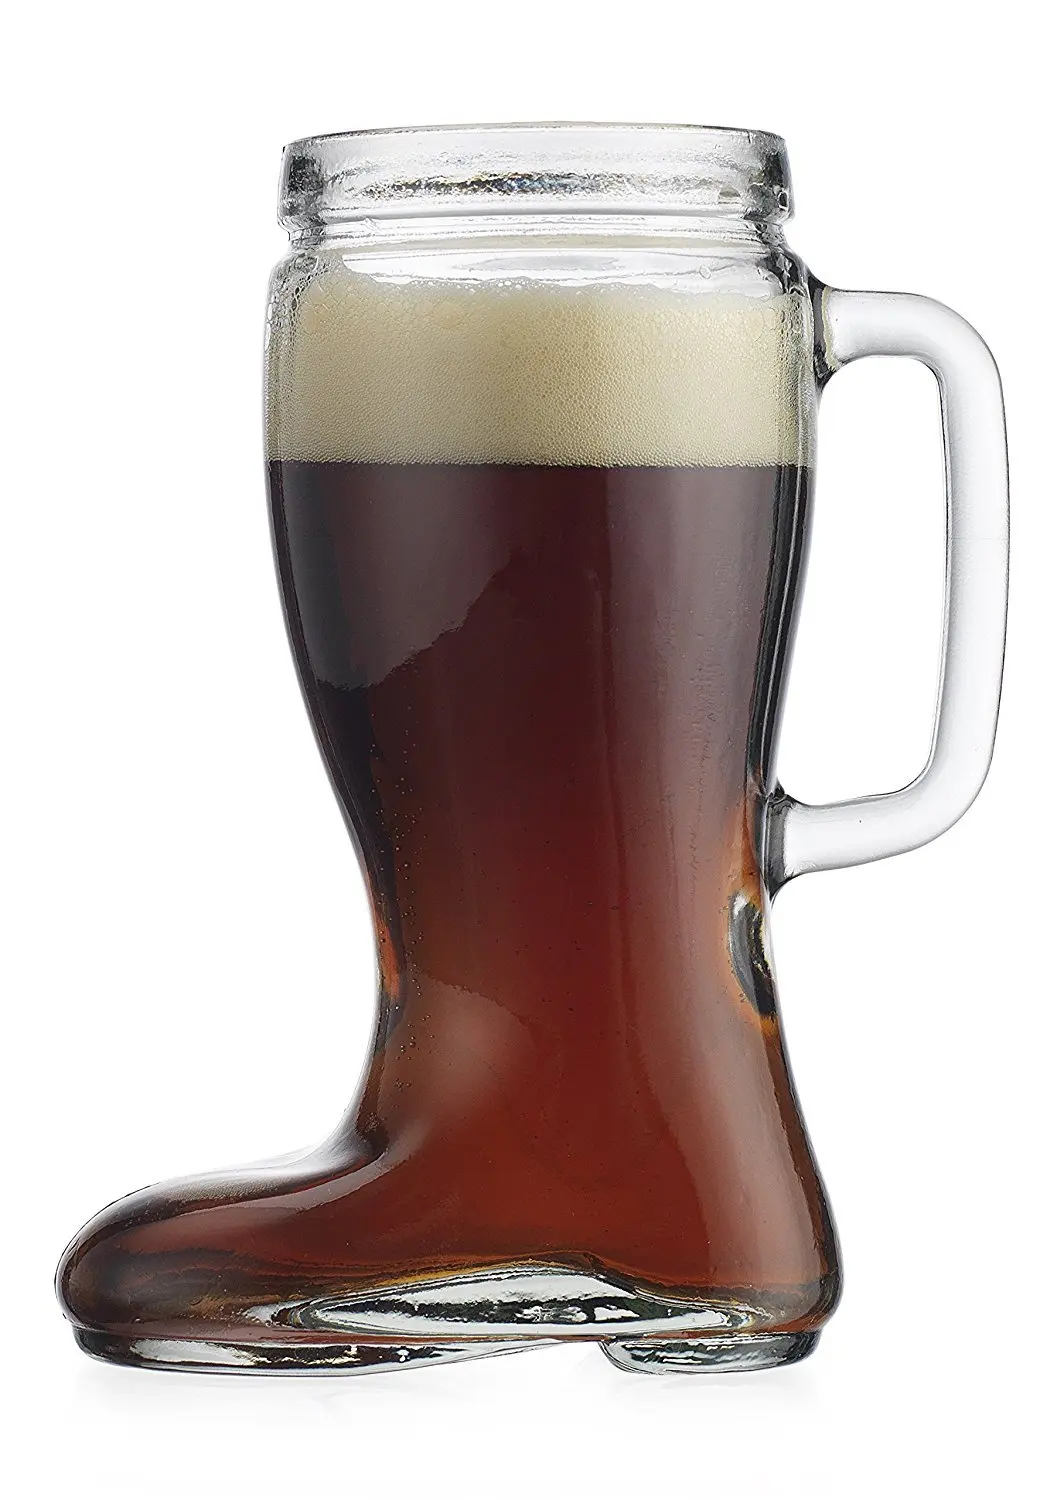 Das Boot Beer Glass 580ml Beer Glass Das Boot Beer Mugs For Bars World Cup You Can